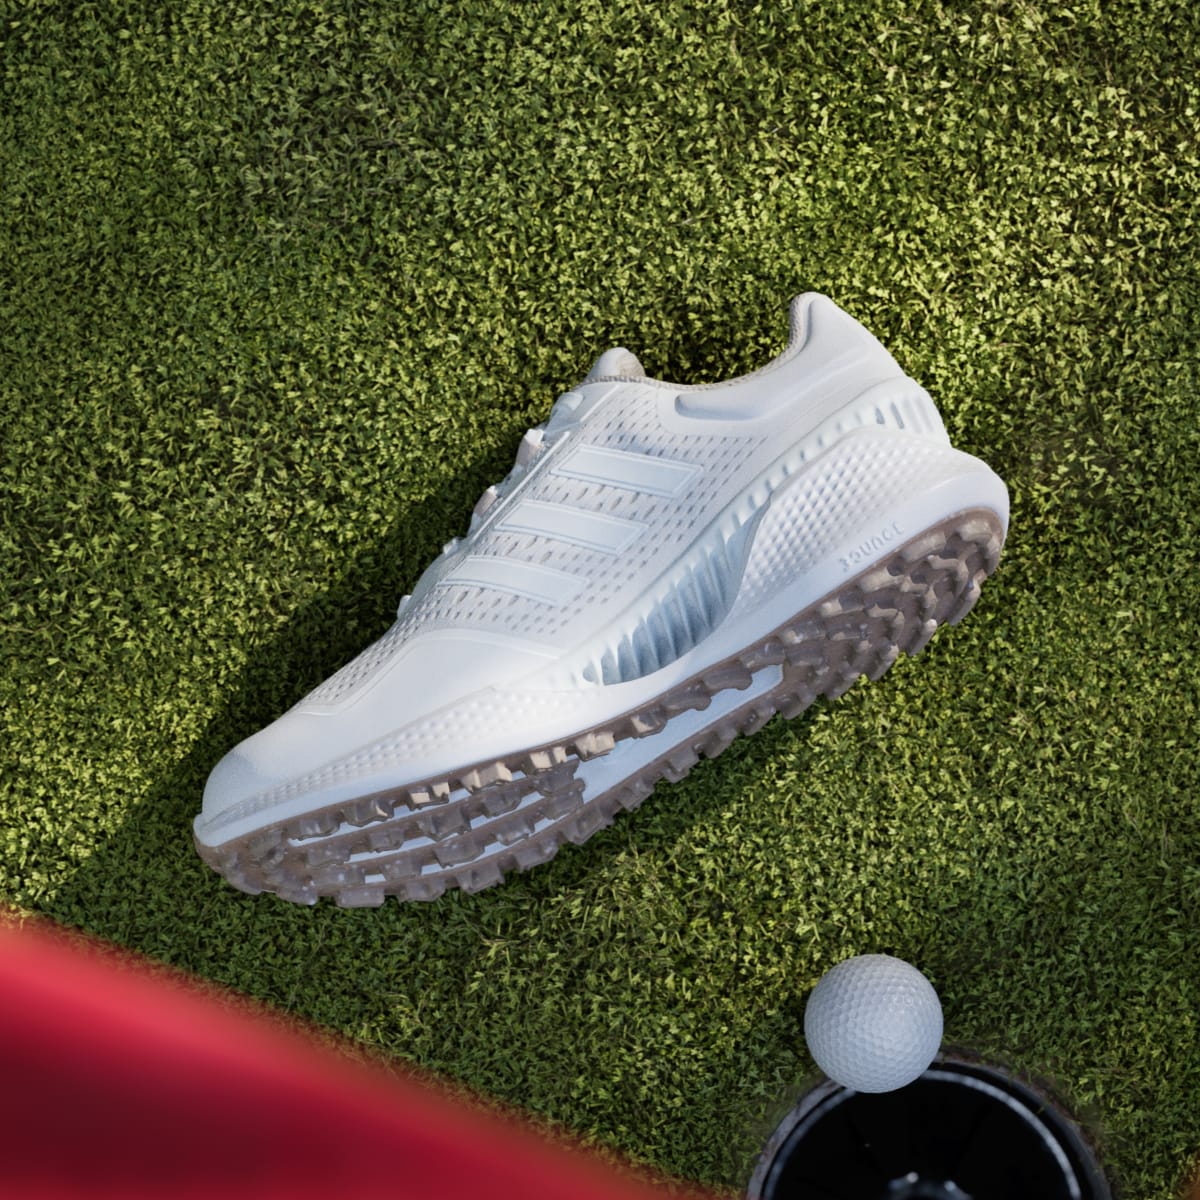 Adidas Summervent 24 Bounce Golf Shoes Low. 6